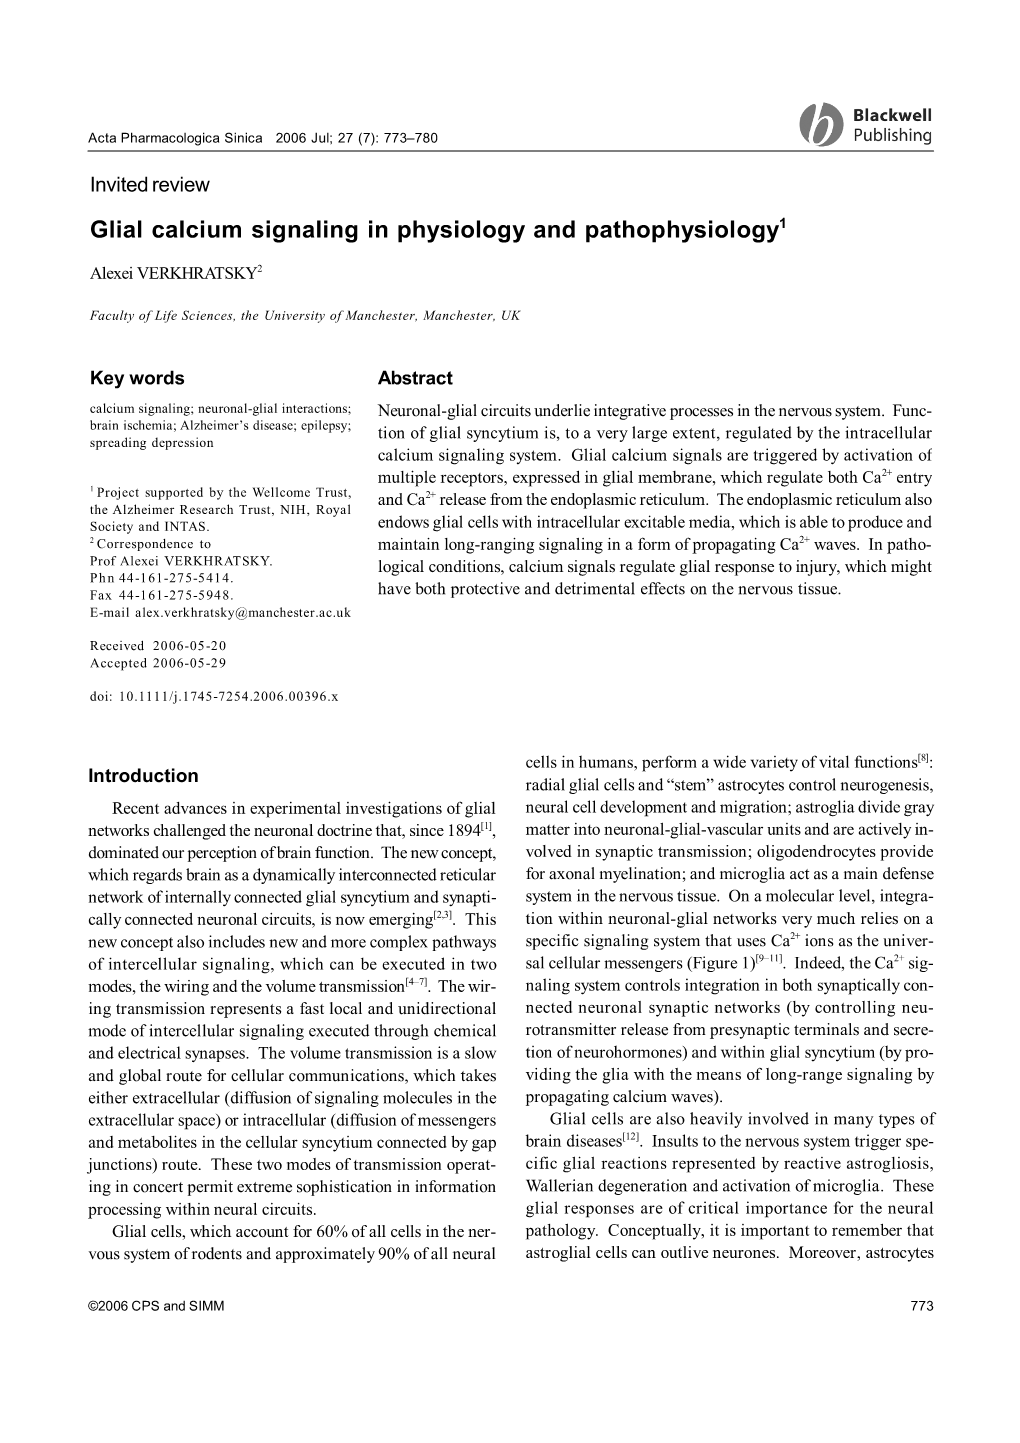 Glial Calcium Signaling in Physiology and Pathophysiology1